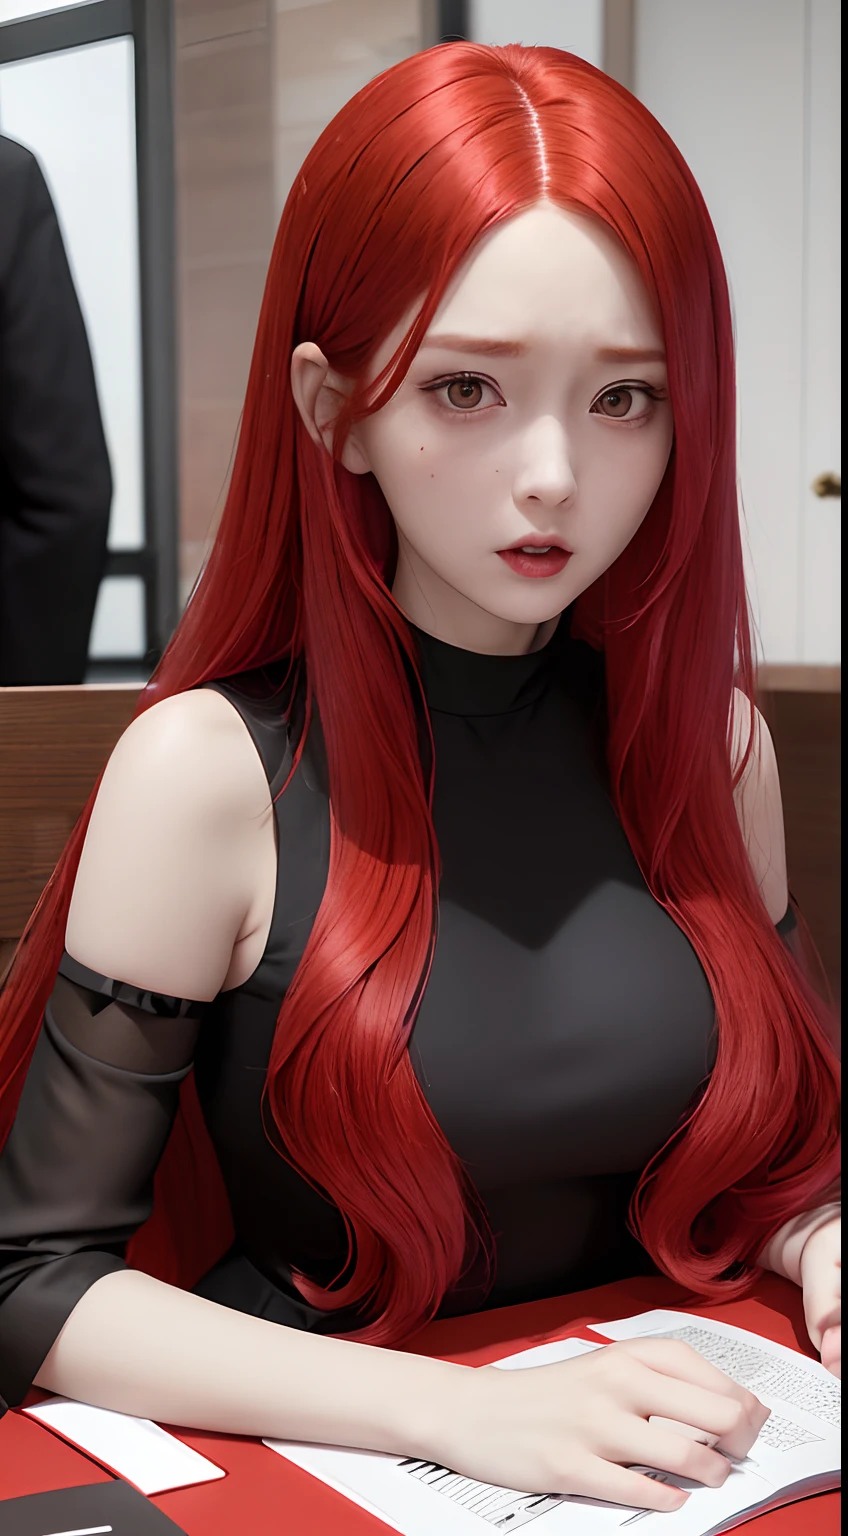 a woman with long red hair sitting at a table with a comic strip, anya from spy x family, & her expression is solemn, anime girl wearing a black dress, rena nounen style 3/4, marvelous expression, she has red hair, grim expression, marin kitagawa fanart, menacing look, very sad, nefarious smirk, manhwa